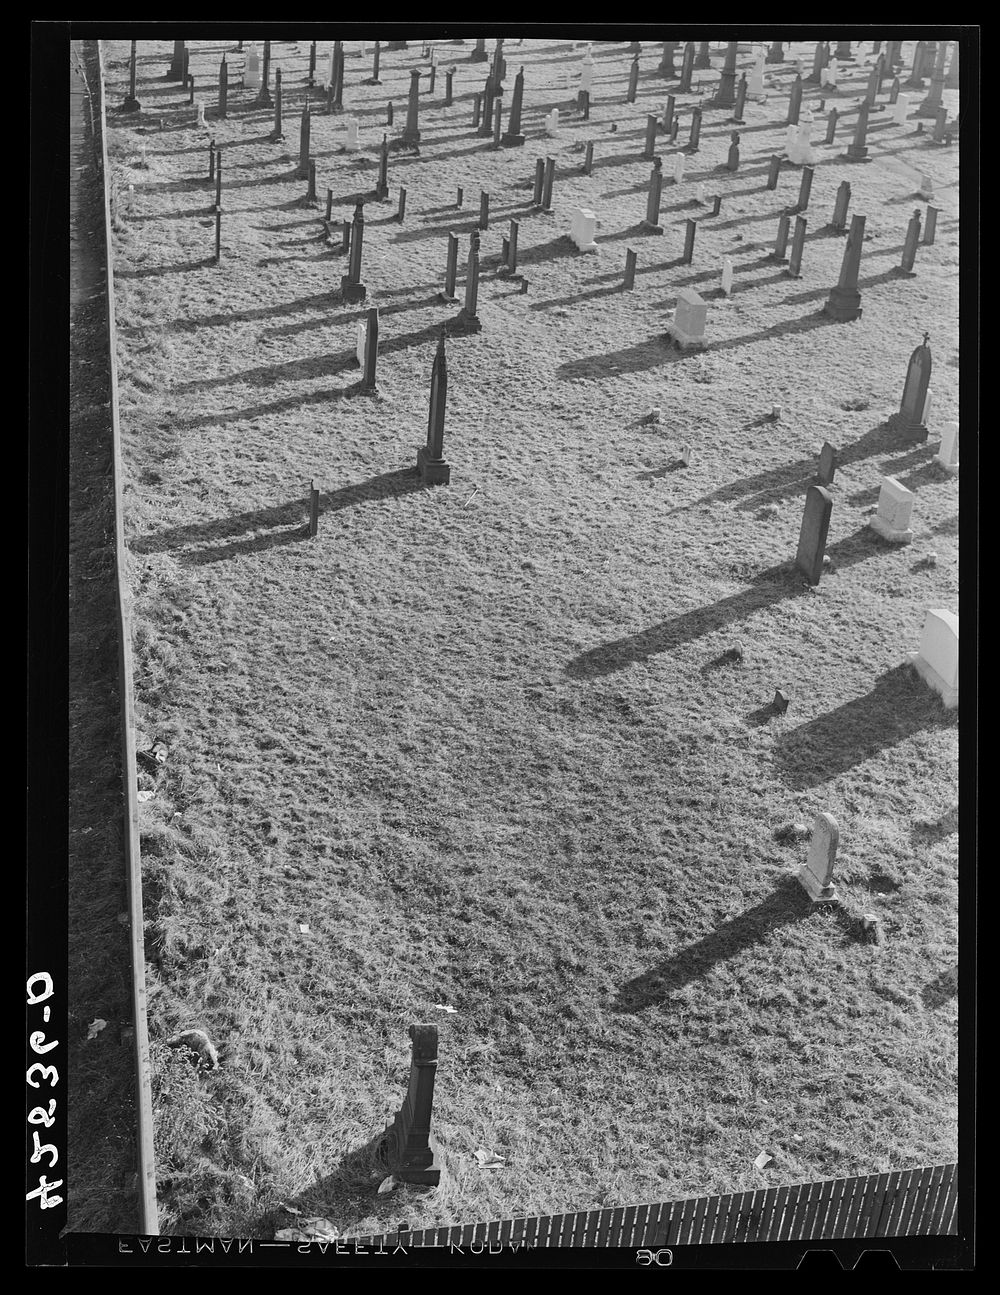 [Untitled photo, possibly related to: Cemetery at Middletown, Connecticut]. Sourced from the Library of Congress.